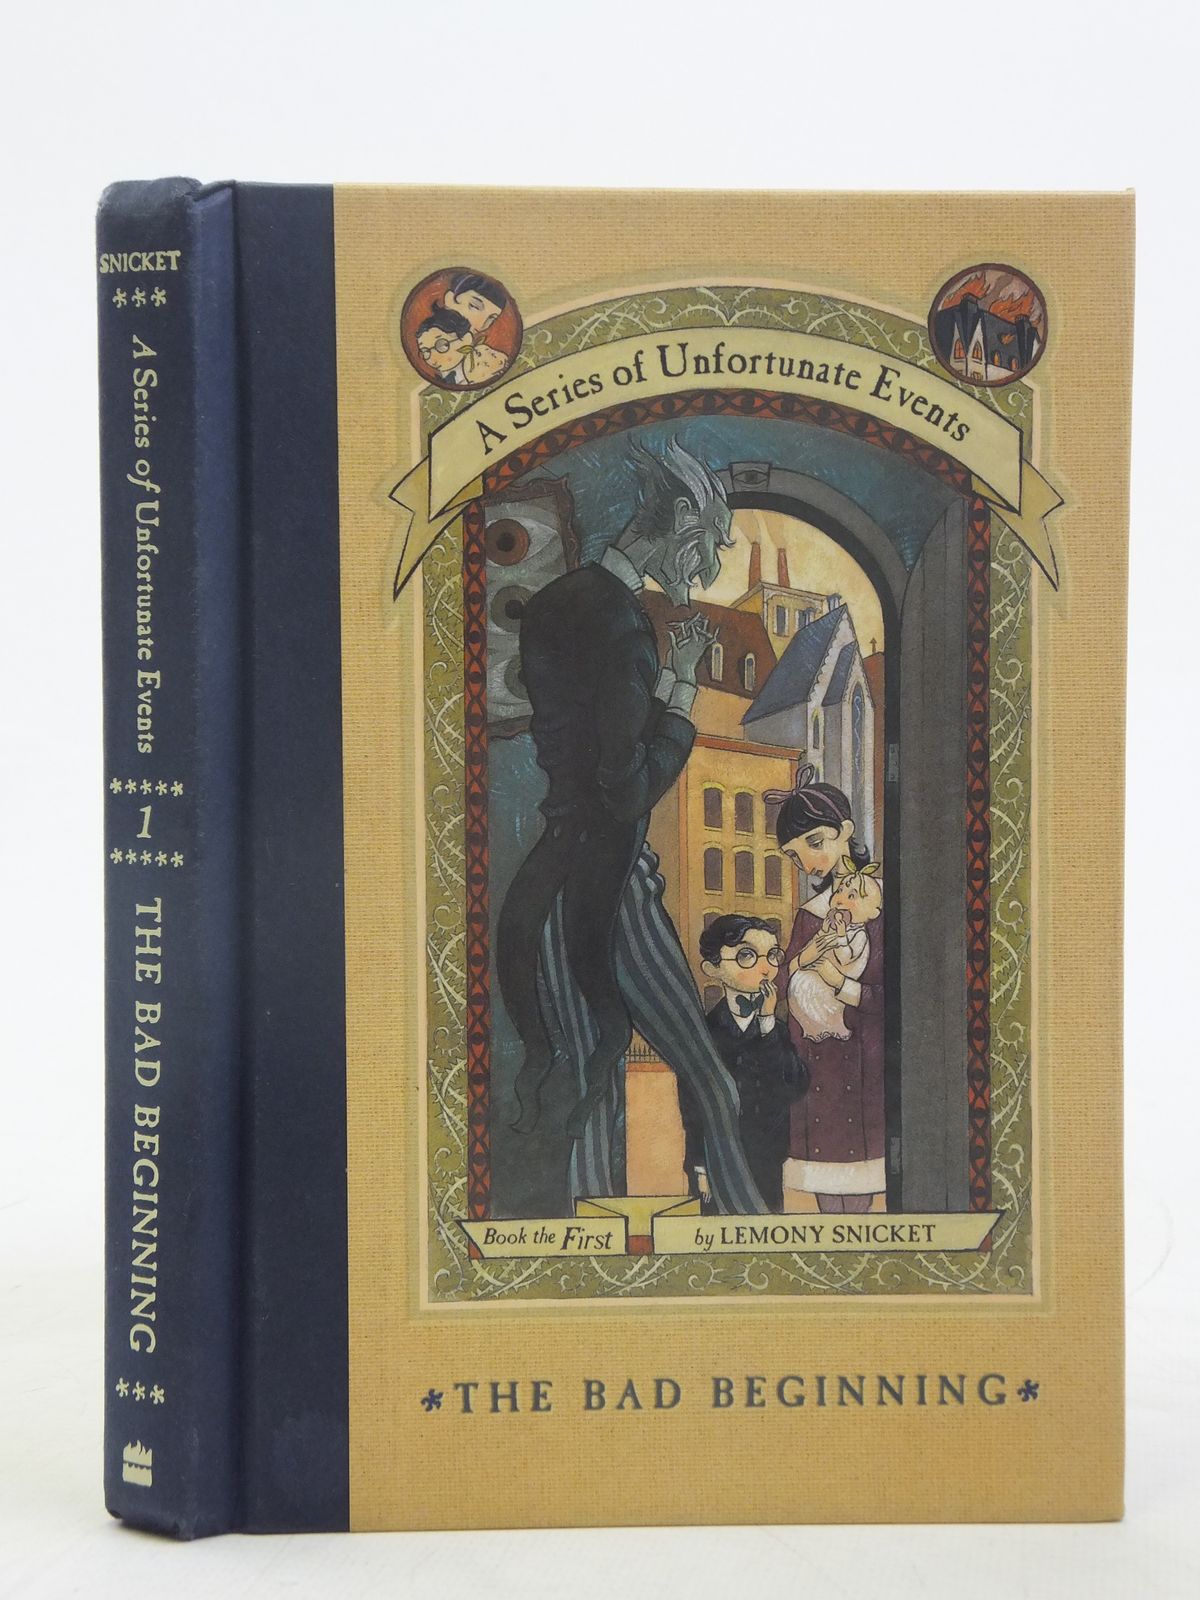 A SERIES OF UNFORTUNATE EVENTS THE BAD BEGINNING written by Snicket